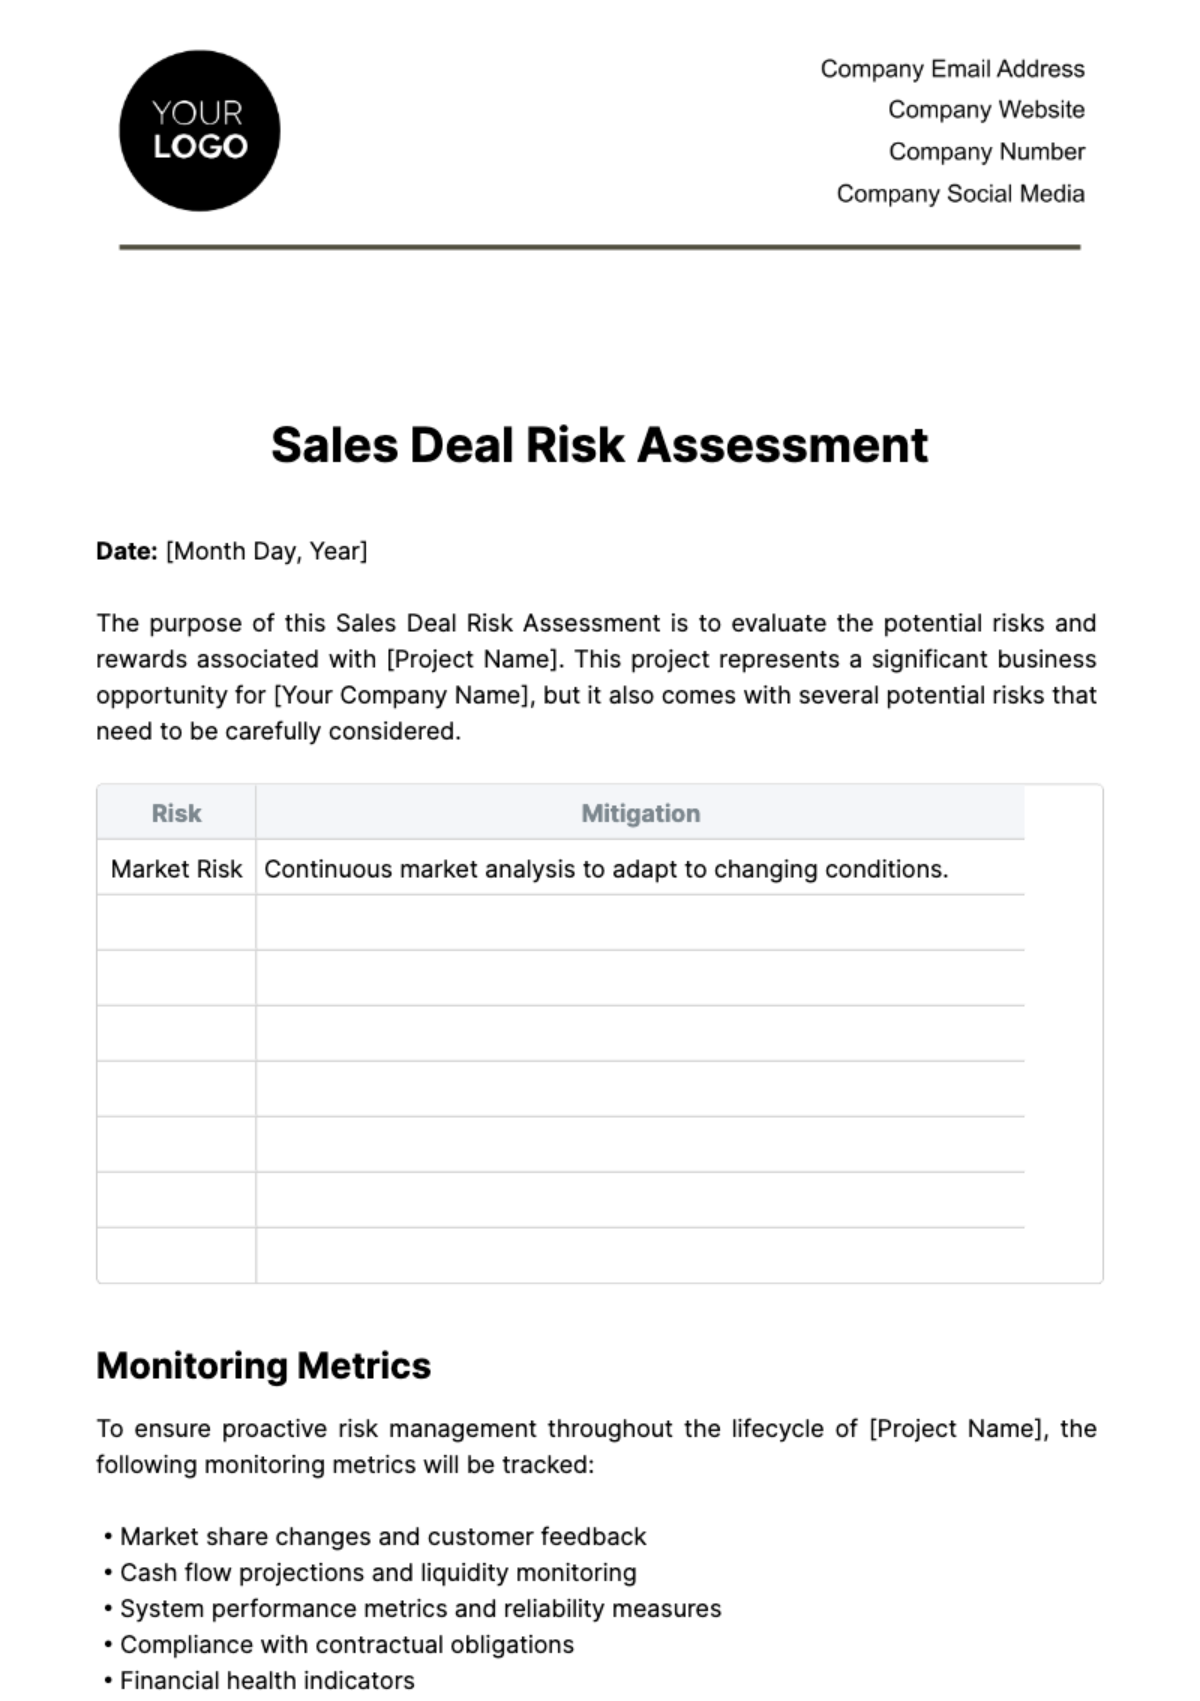 Free Sales Deal Risk Assessment Template